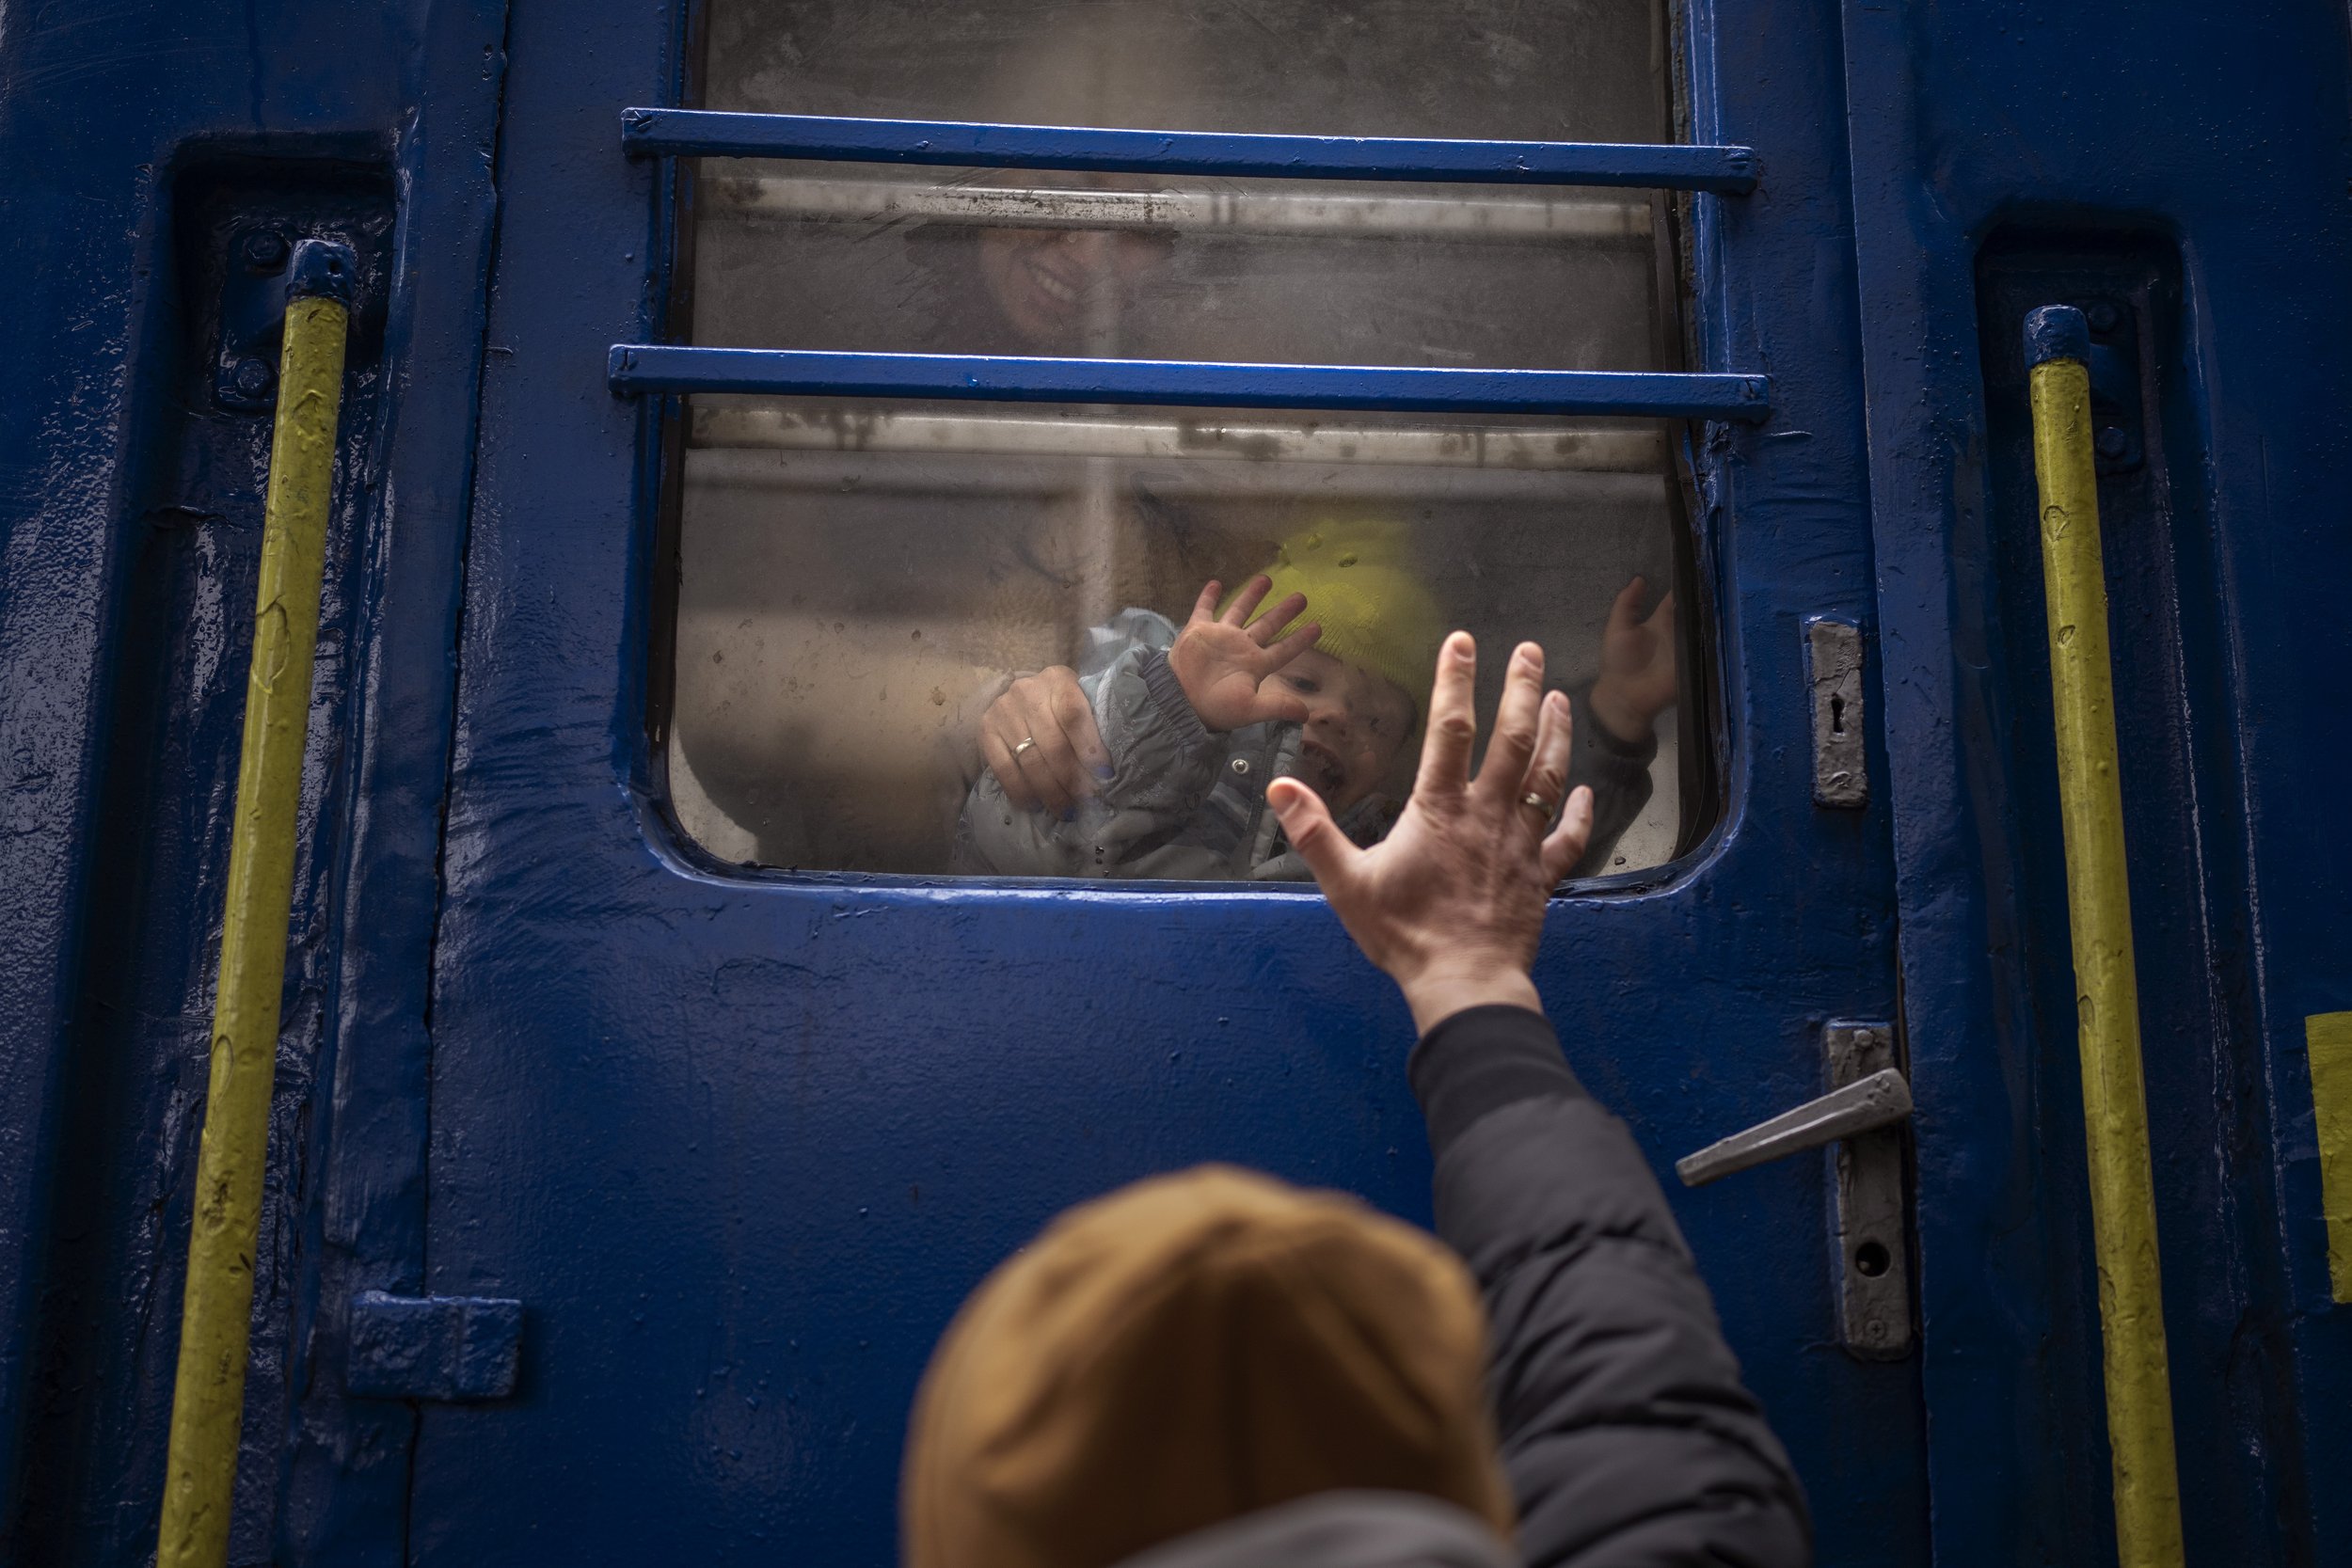  Stanislav, 40, says goodbye to his son David, 2, and his wife Anna, 35, on a train to Lviv at the Kyiv station, Ukraine, Thursday, March 3. 2022. Stanislav is staying to fight while his family is leaving the country to seek refuge in a neighbouring 